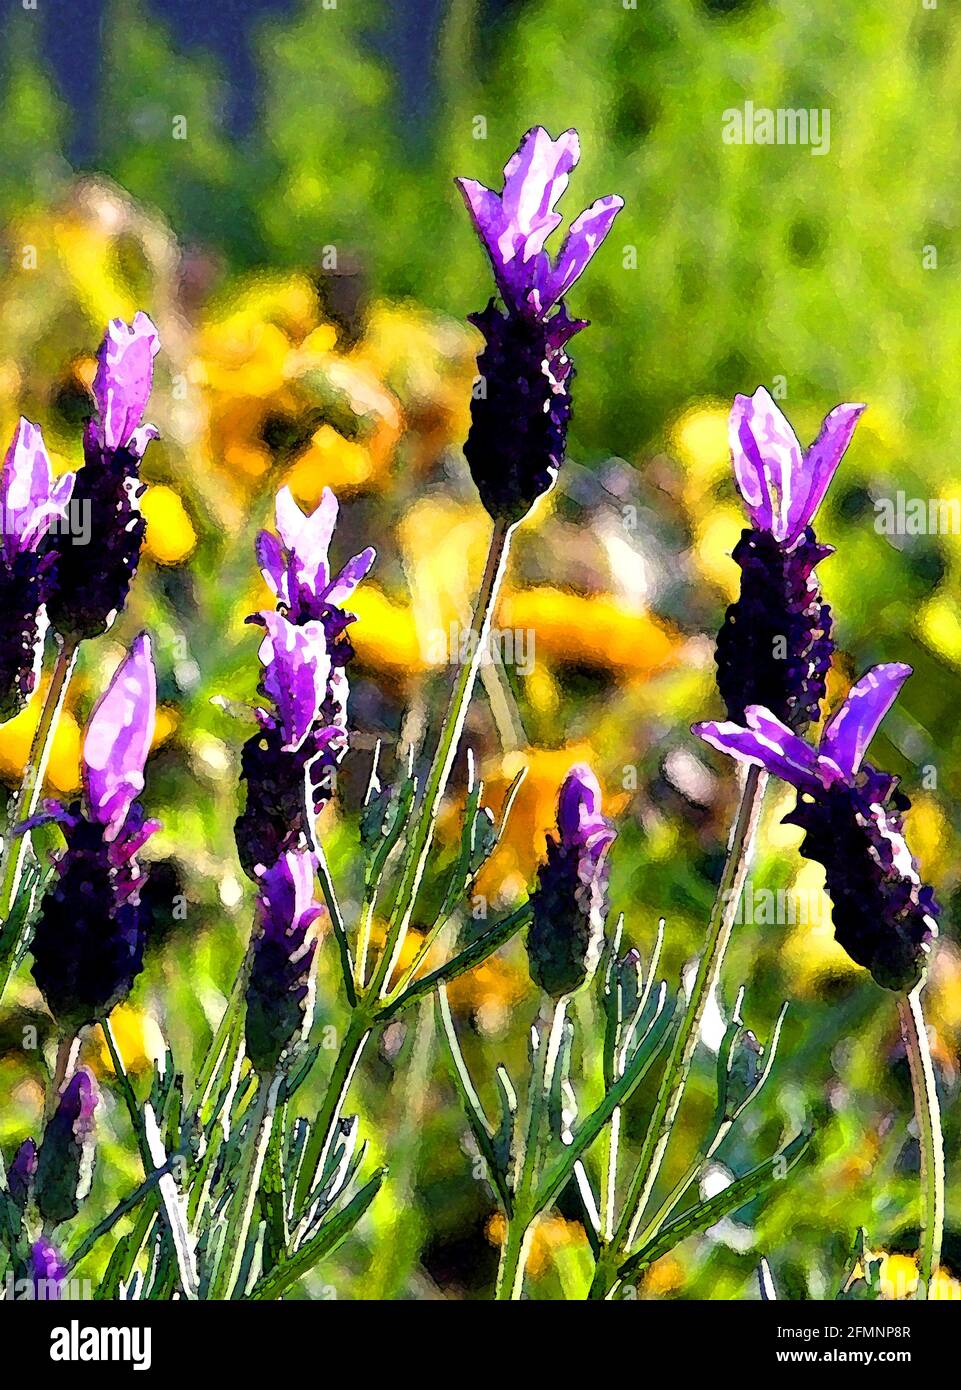 Lavender  (lavandula stoechas) One of Forty-two Iconic Images of English Garden Flowers, Wildflowers and Rural Landscapes. Stock Photo